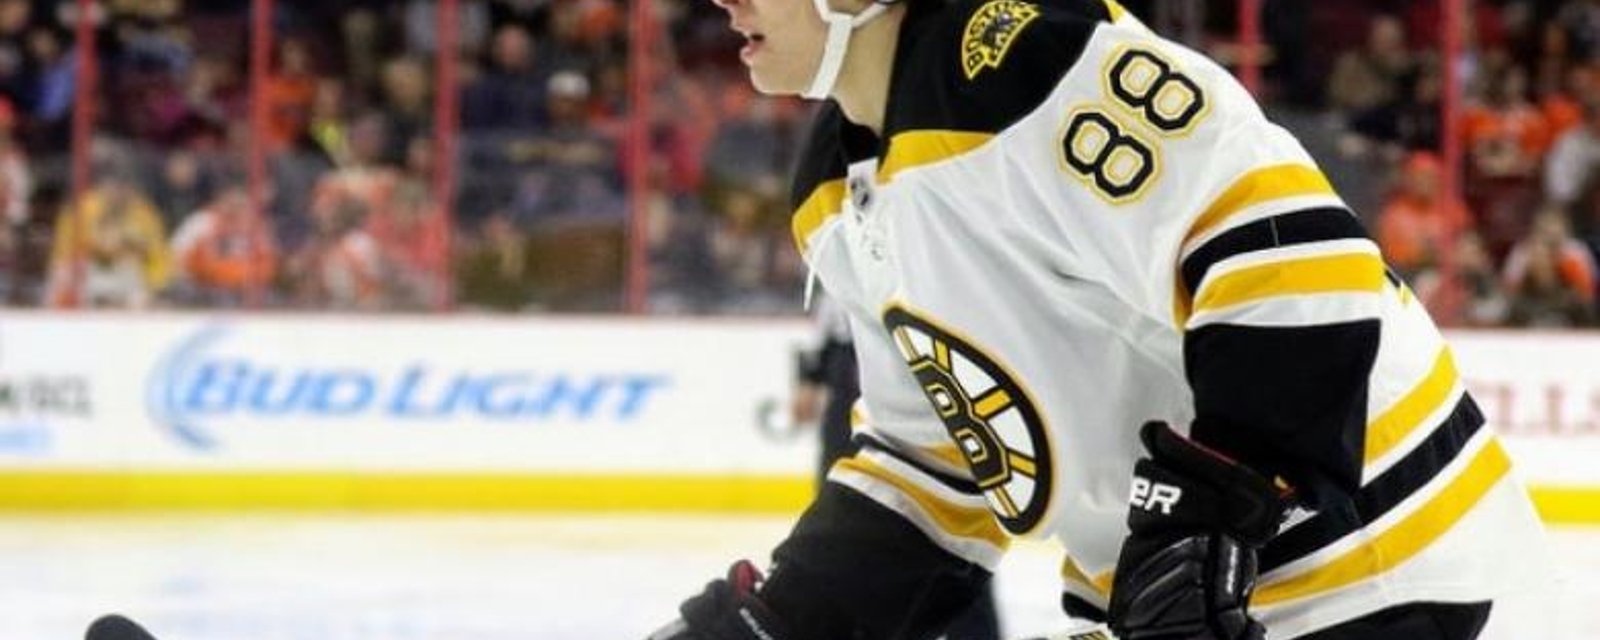 What Will The Bruins Do With David Pastrnak?